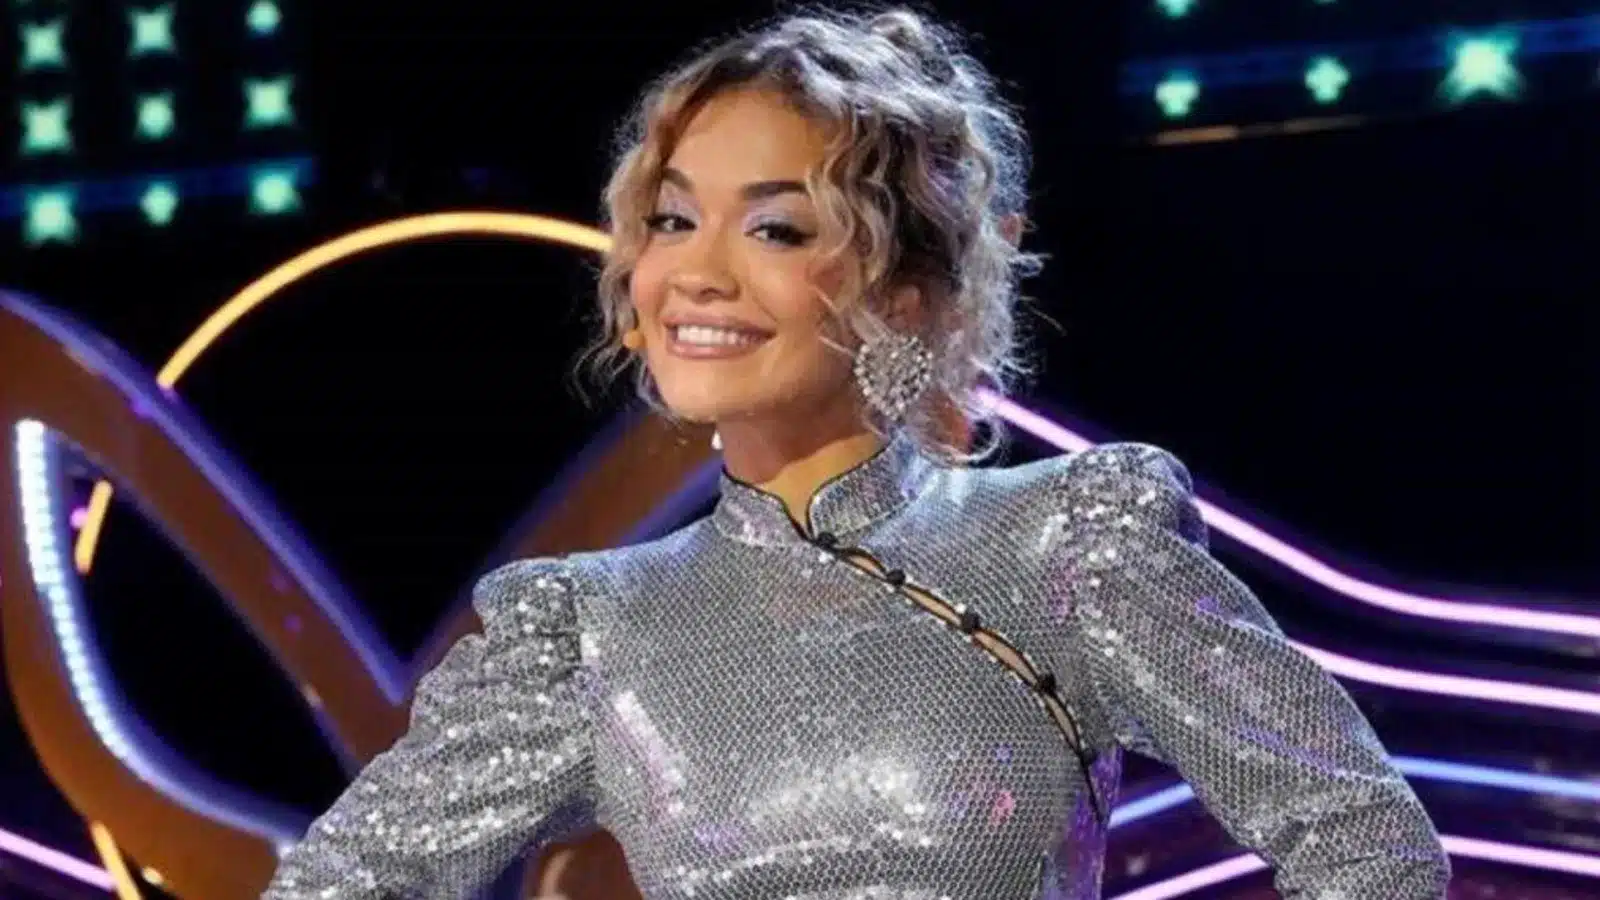 Fox. Promotional photo of Rita Ora for The Masked Singer.